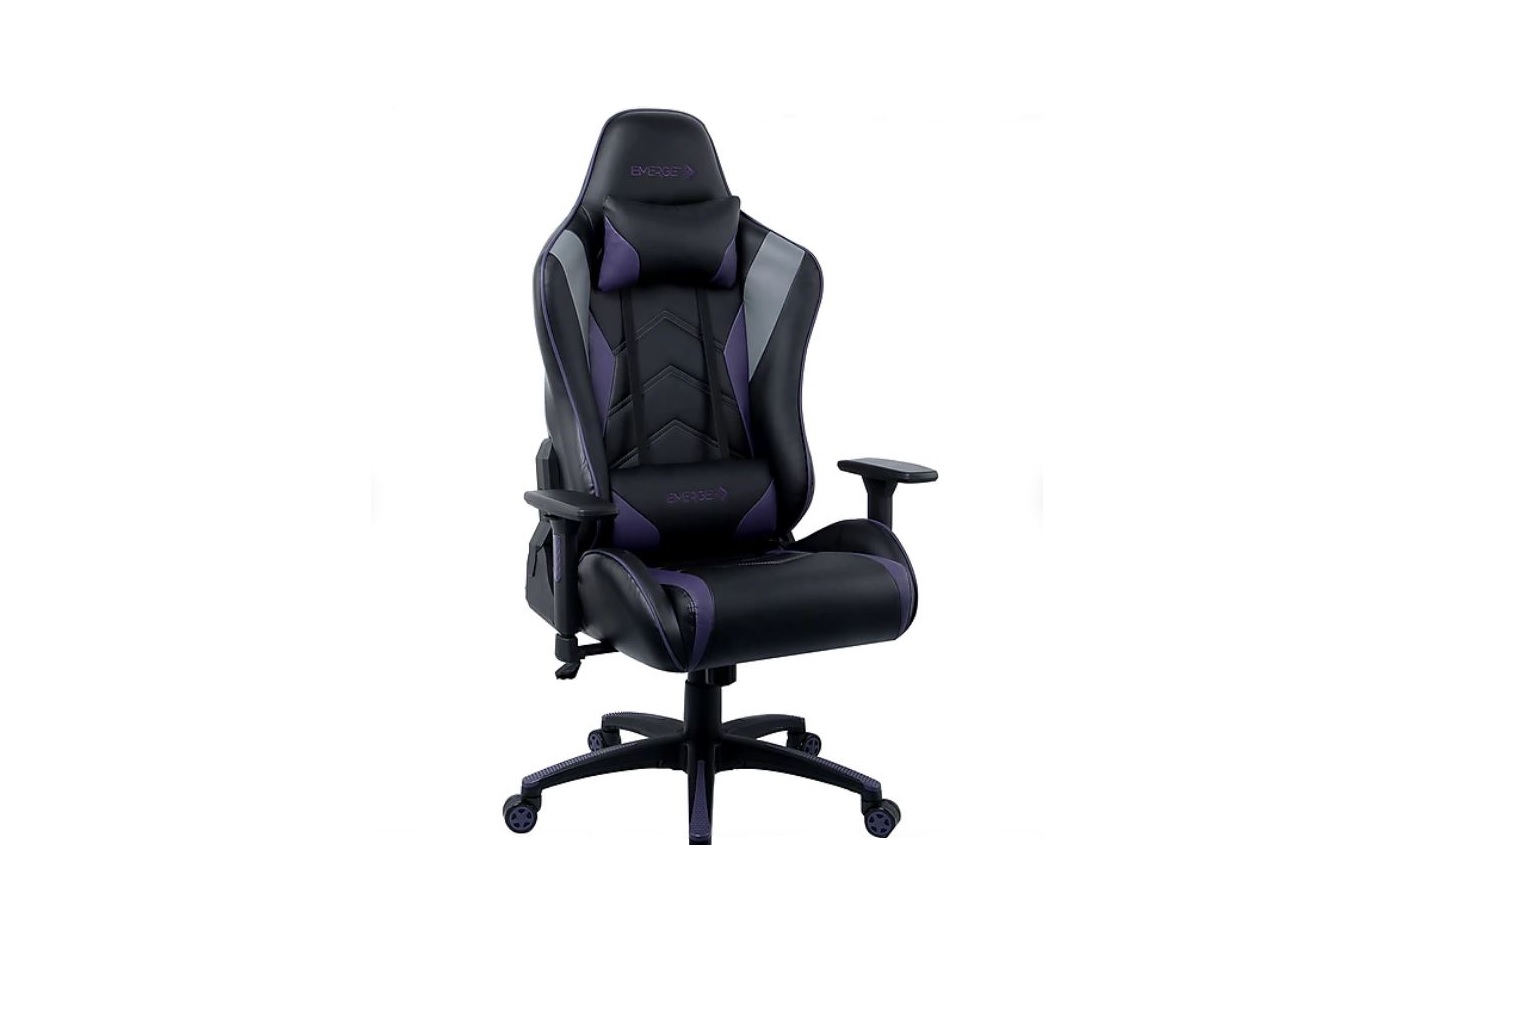 Black and grey gaming chair on a white background.